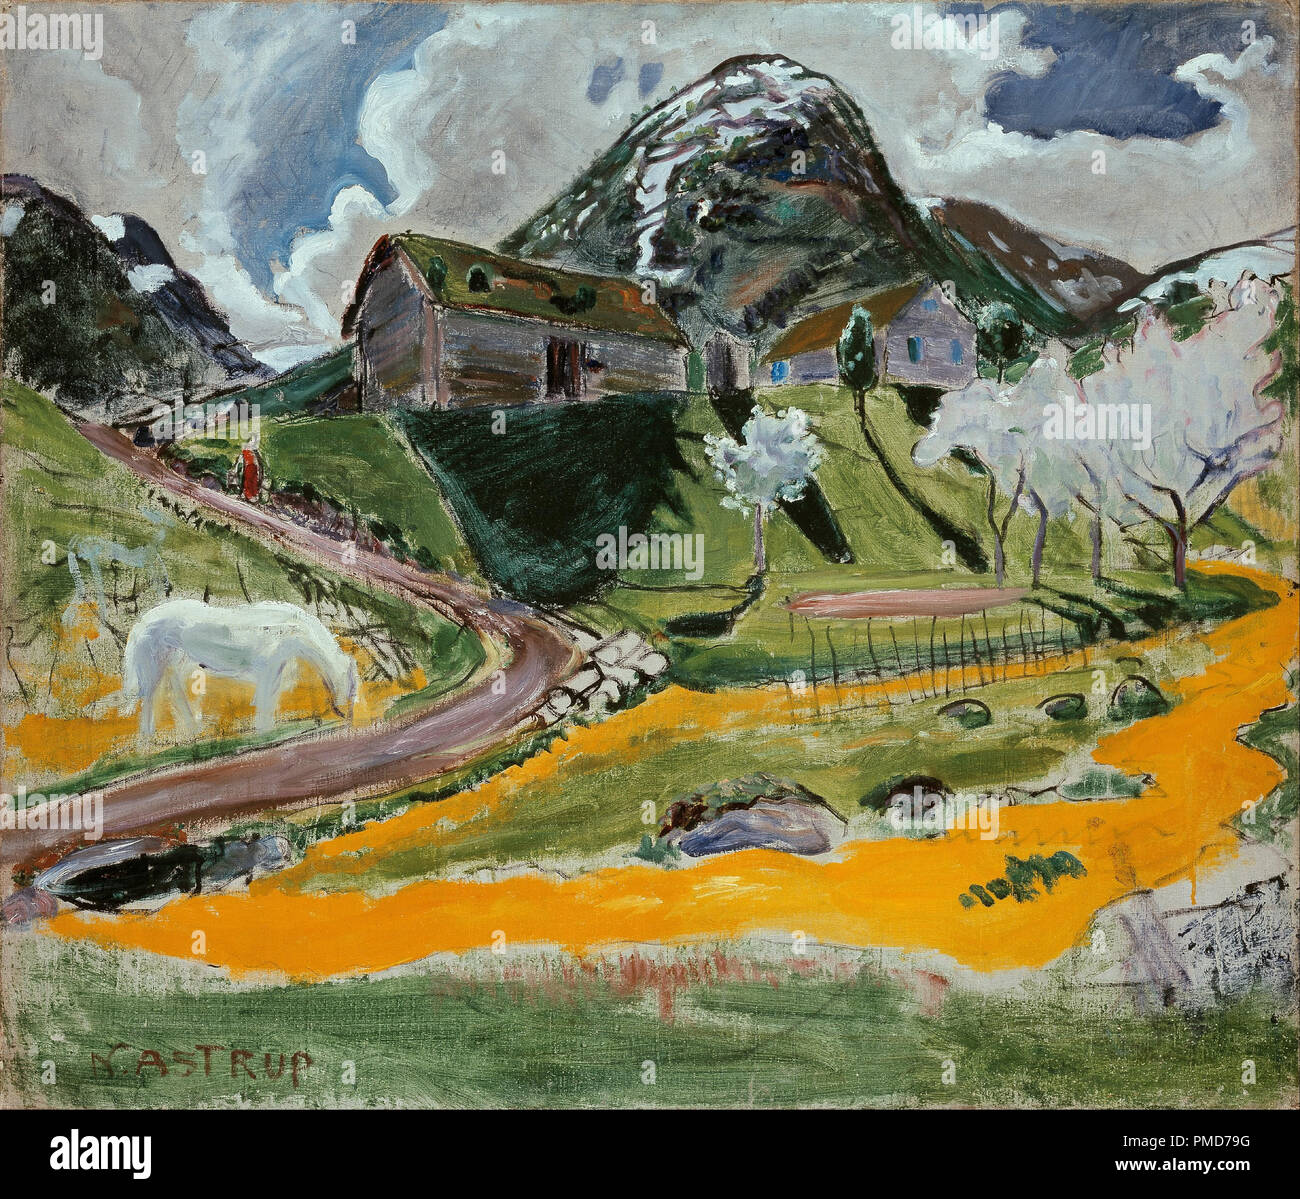 The white Horse in Spring. Date/Period: 1914/1915. Painting. Olje på lerret. Width: 105 cm. Height: 90 cm. Author: Nikolai Astrup. Stock Photo